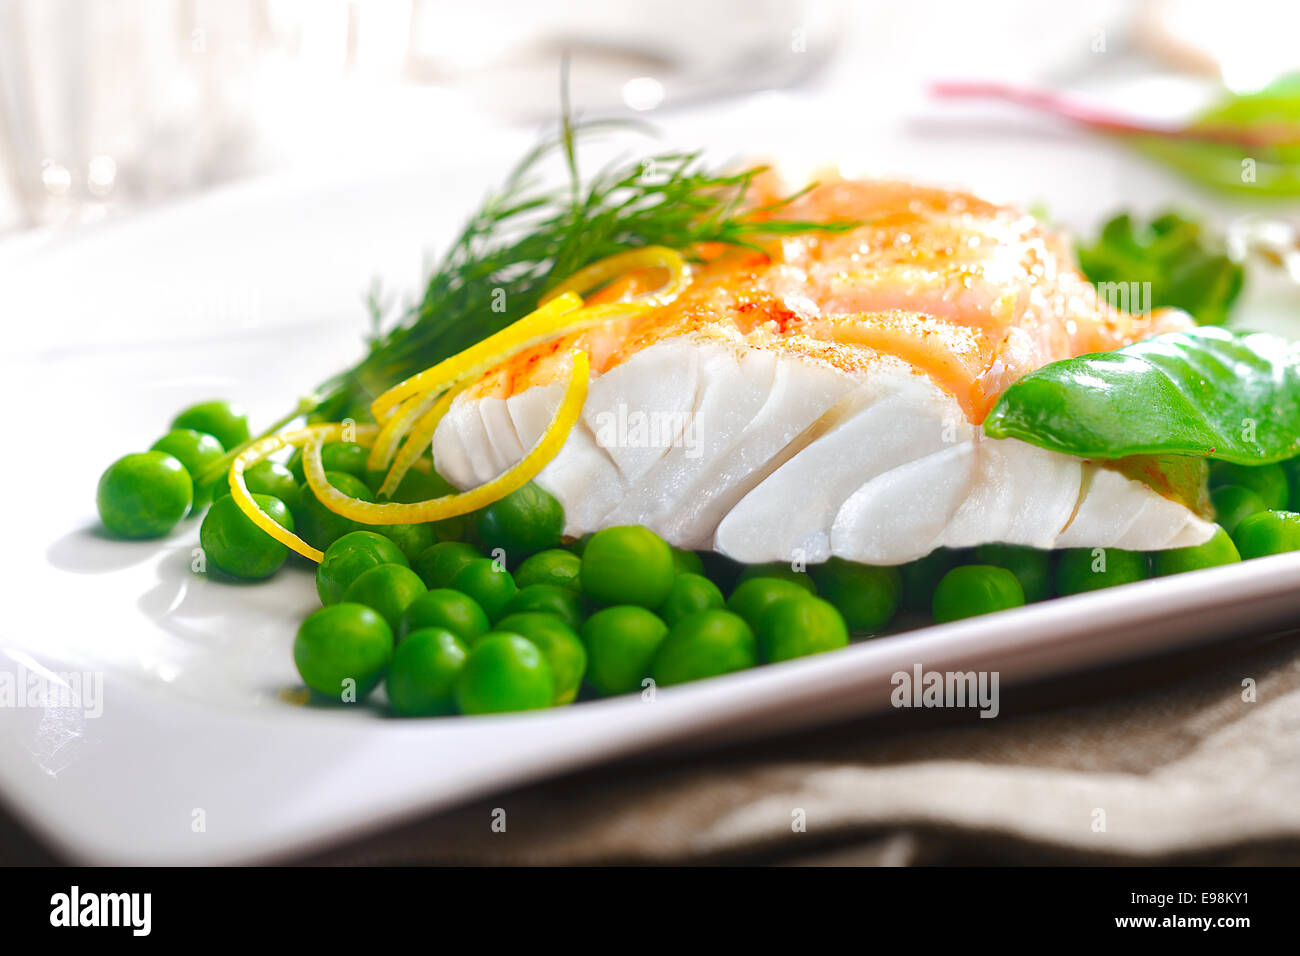 Delicious oven baked fish or grilled fillet or steak with peas, a mangetout pod, lemon zest and fresh dill for a nutritious seafood dinner Stock Photo